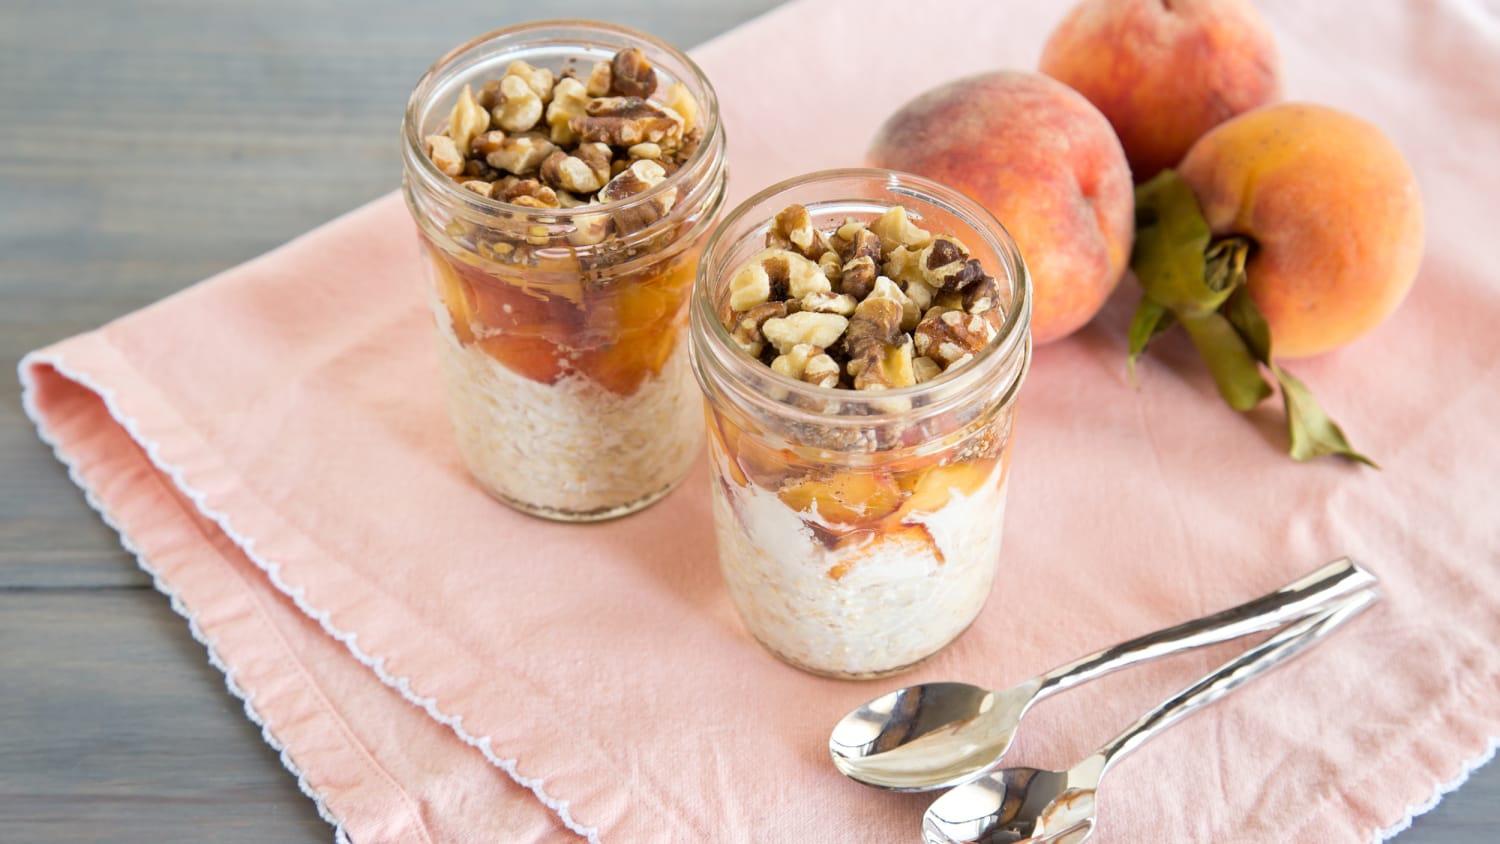 Peach Oatmeal ⋆ Easy, Tasty, and Only 20 Minutes!